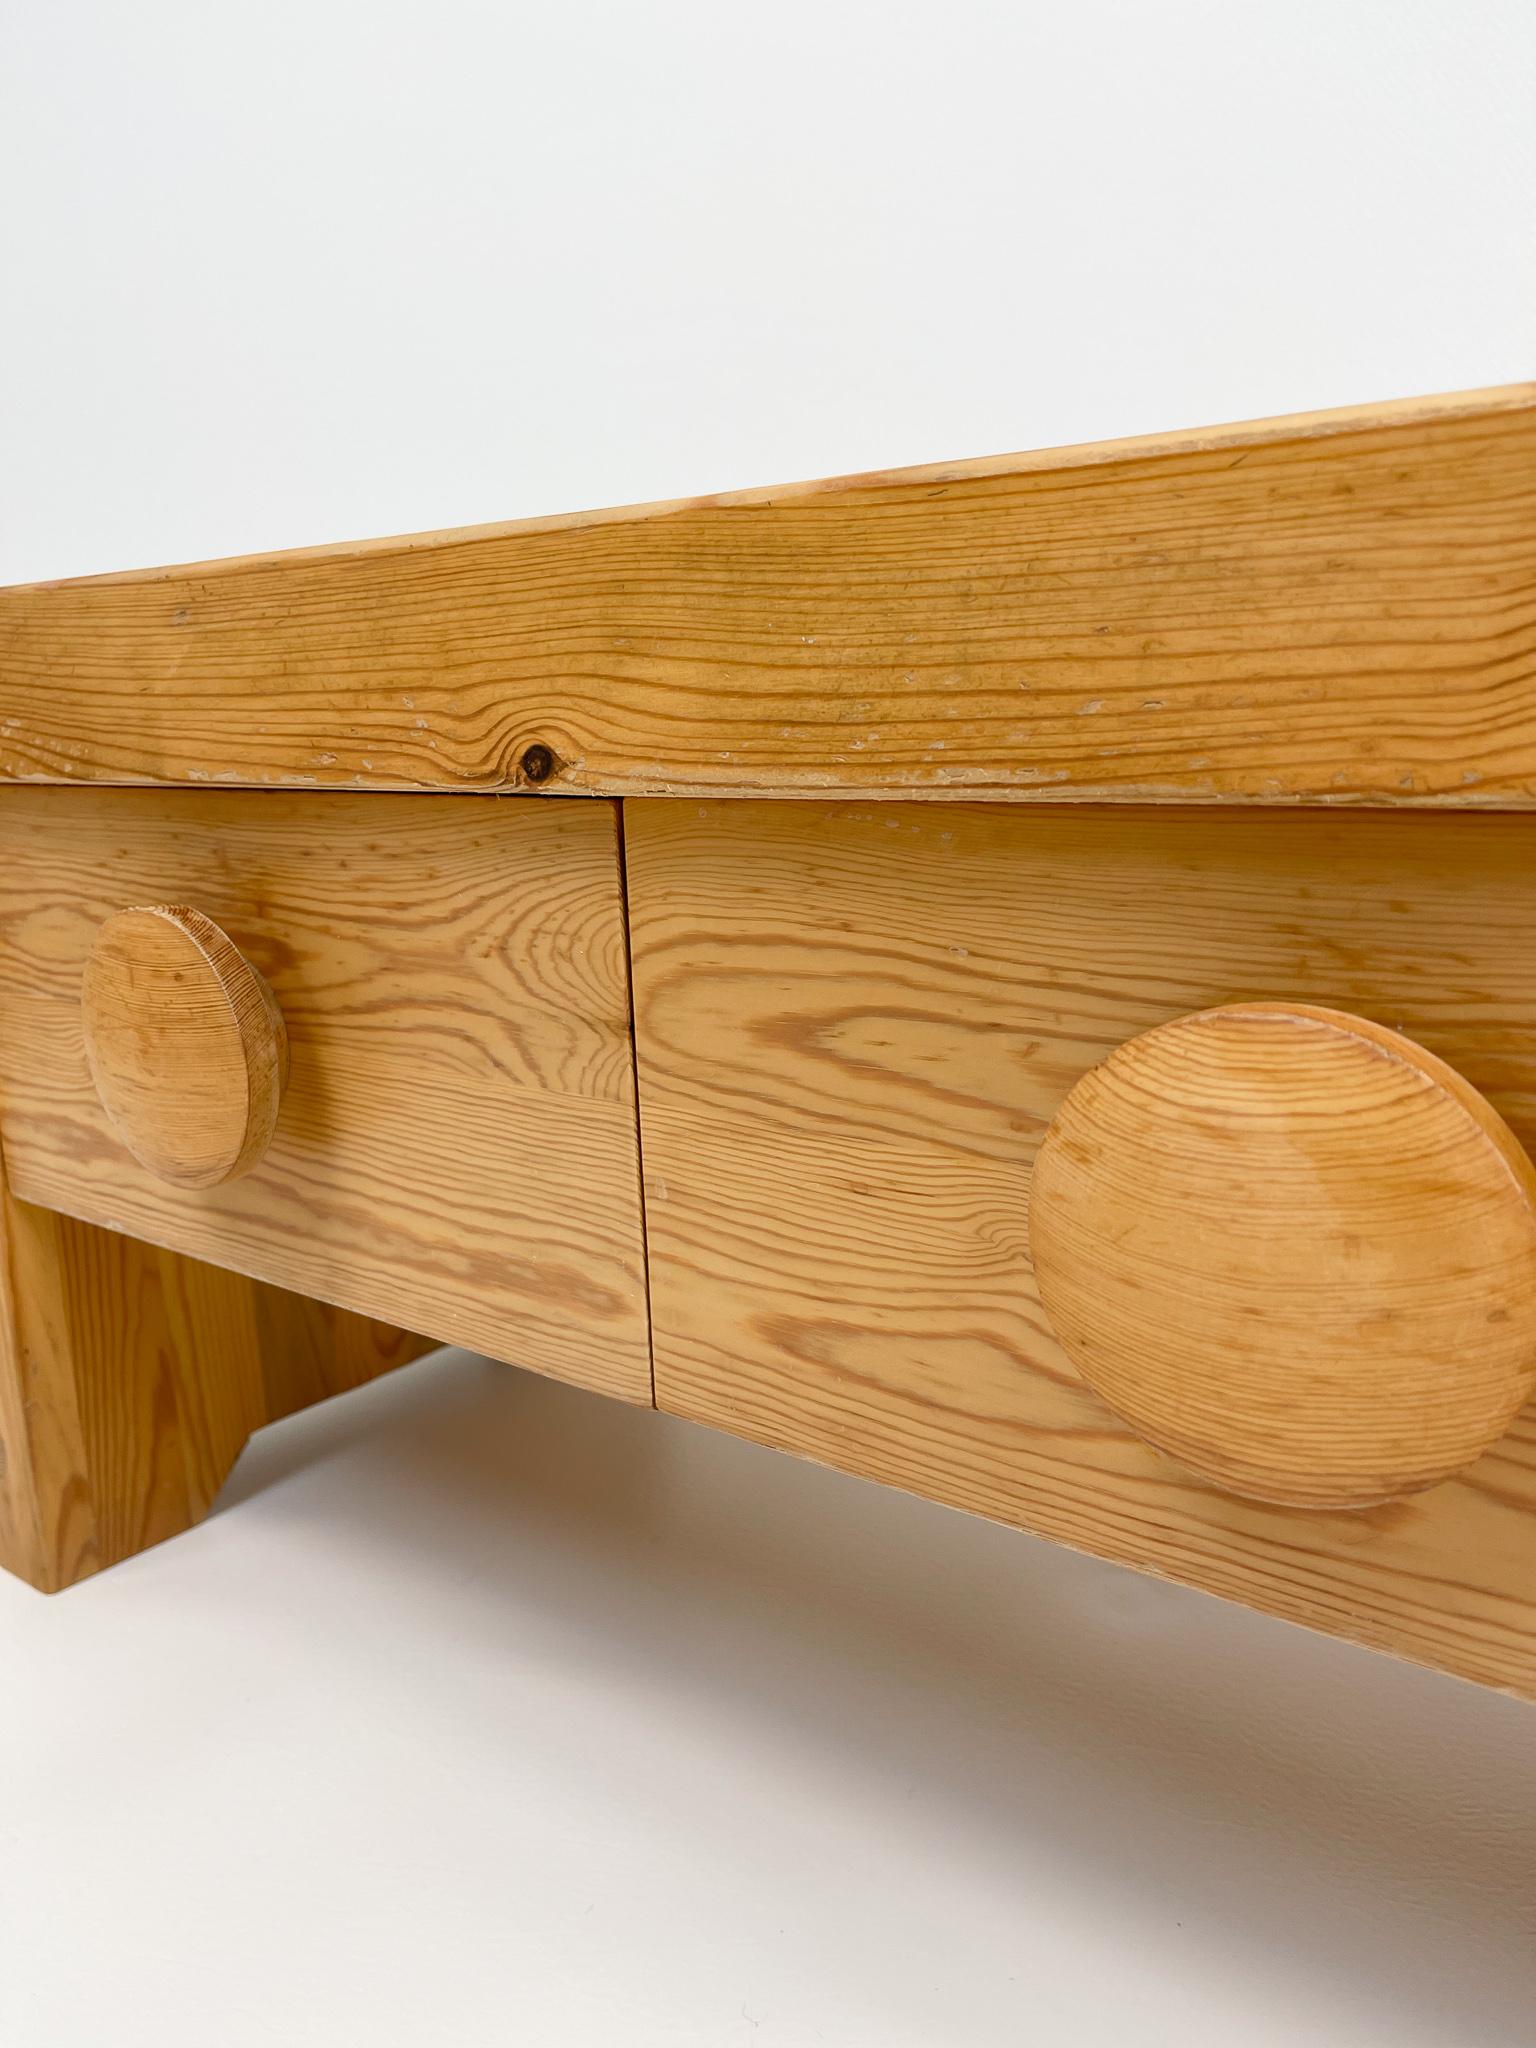 Late 20th Century Scandinavian Modern Solid Pine Bench by Fröseke, Furniture Maker in Sweden, 1970s For Sale